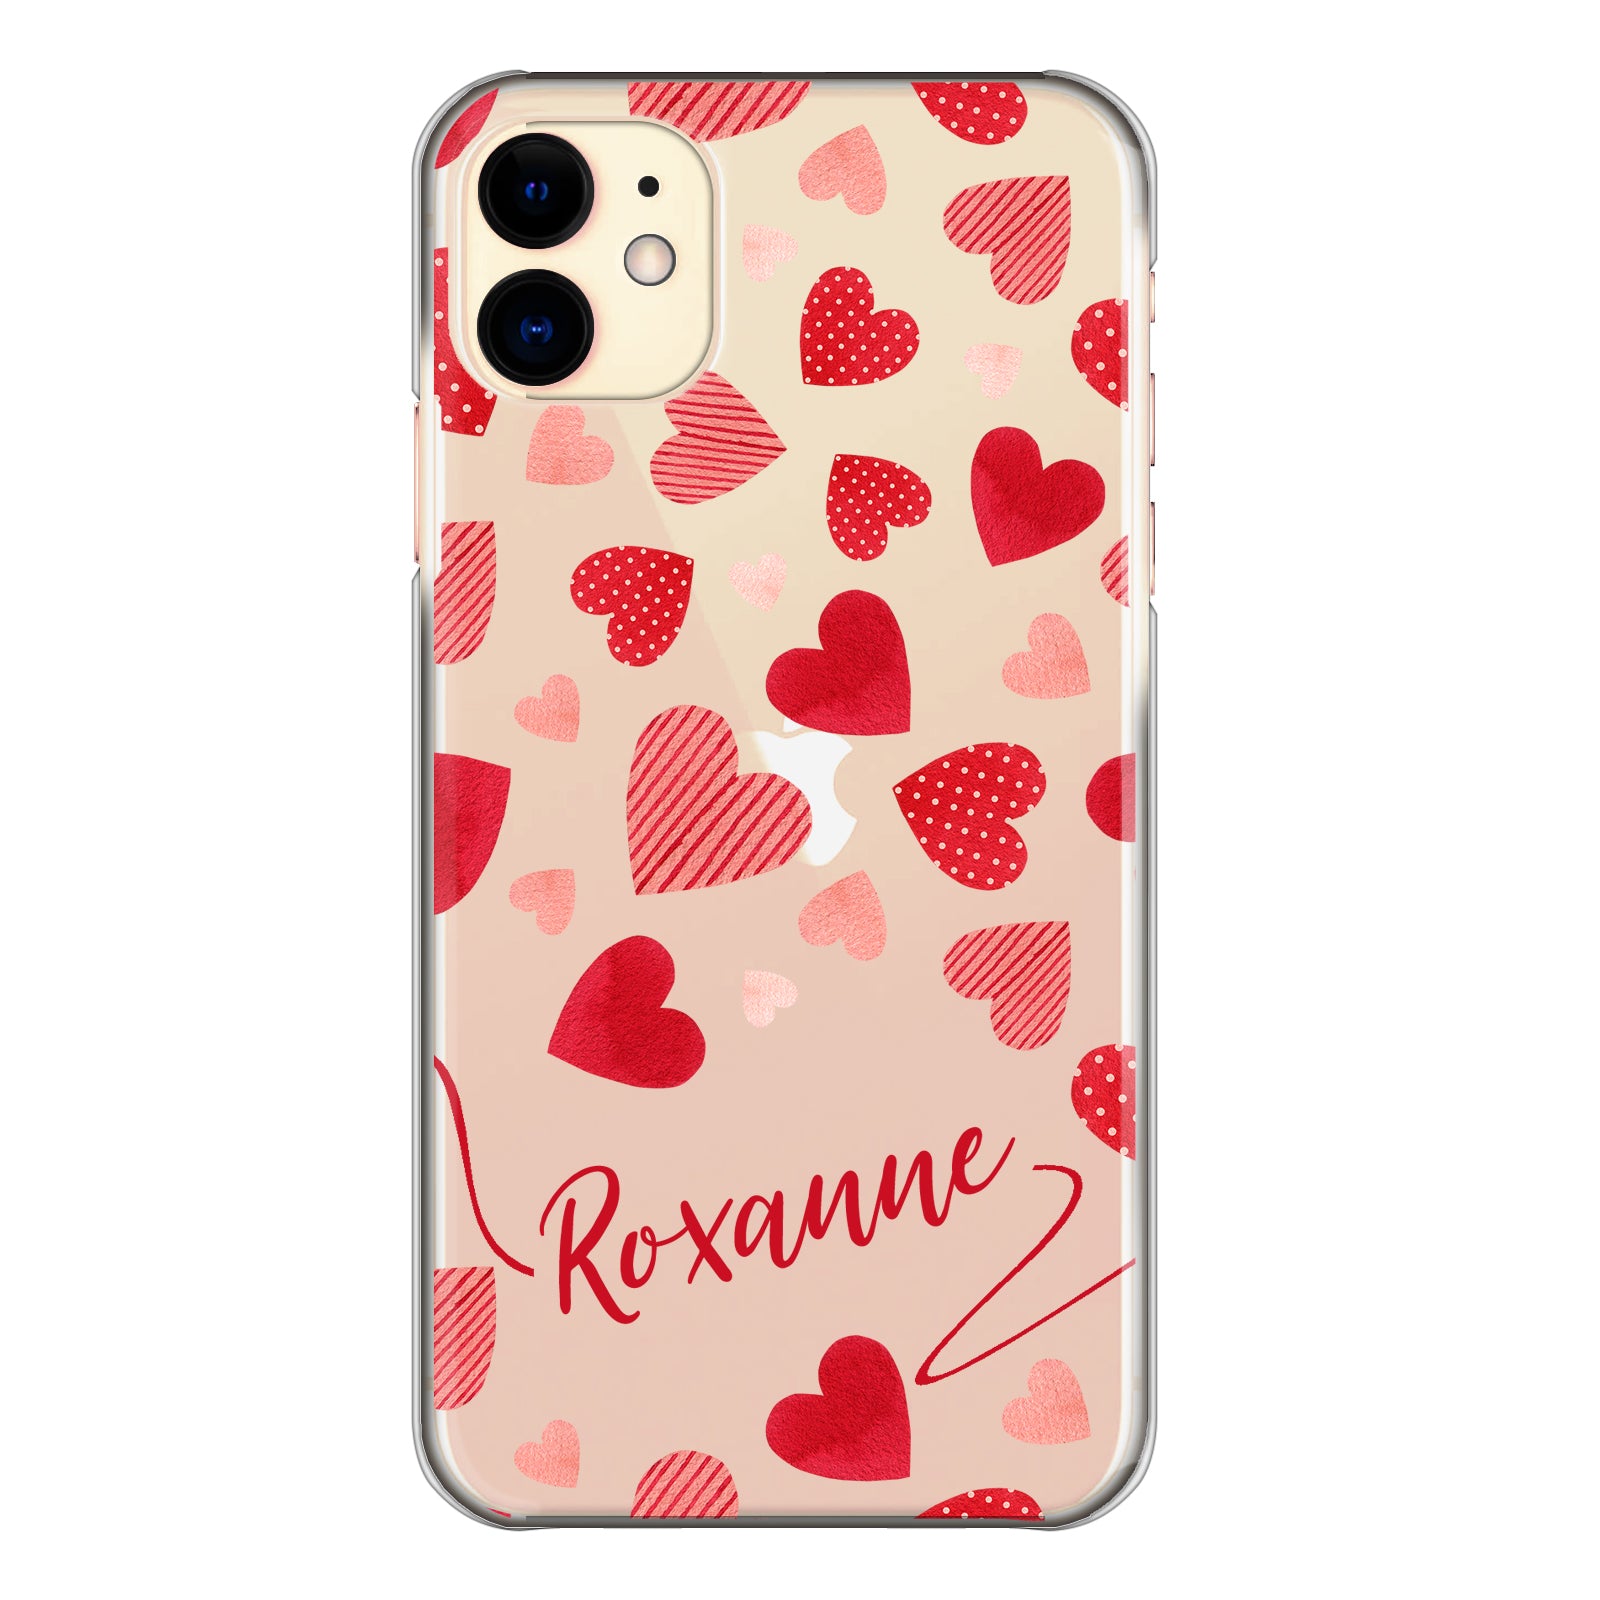 Personalised Honor Phone Hard Case with Polka Dot/Striped Hearts and Stylish Text